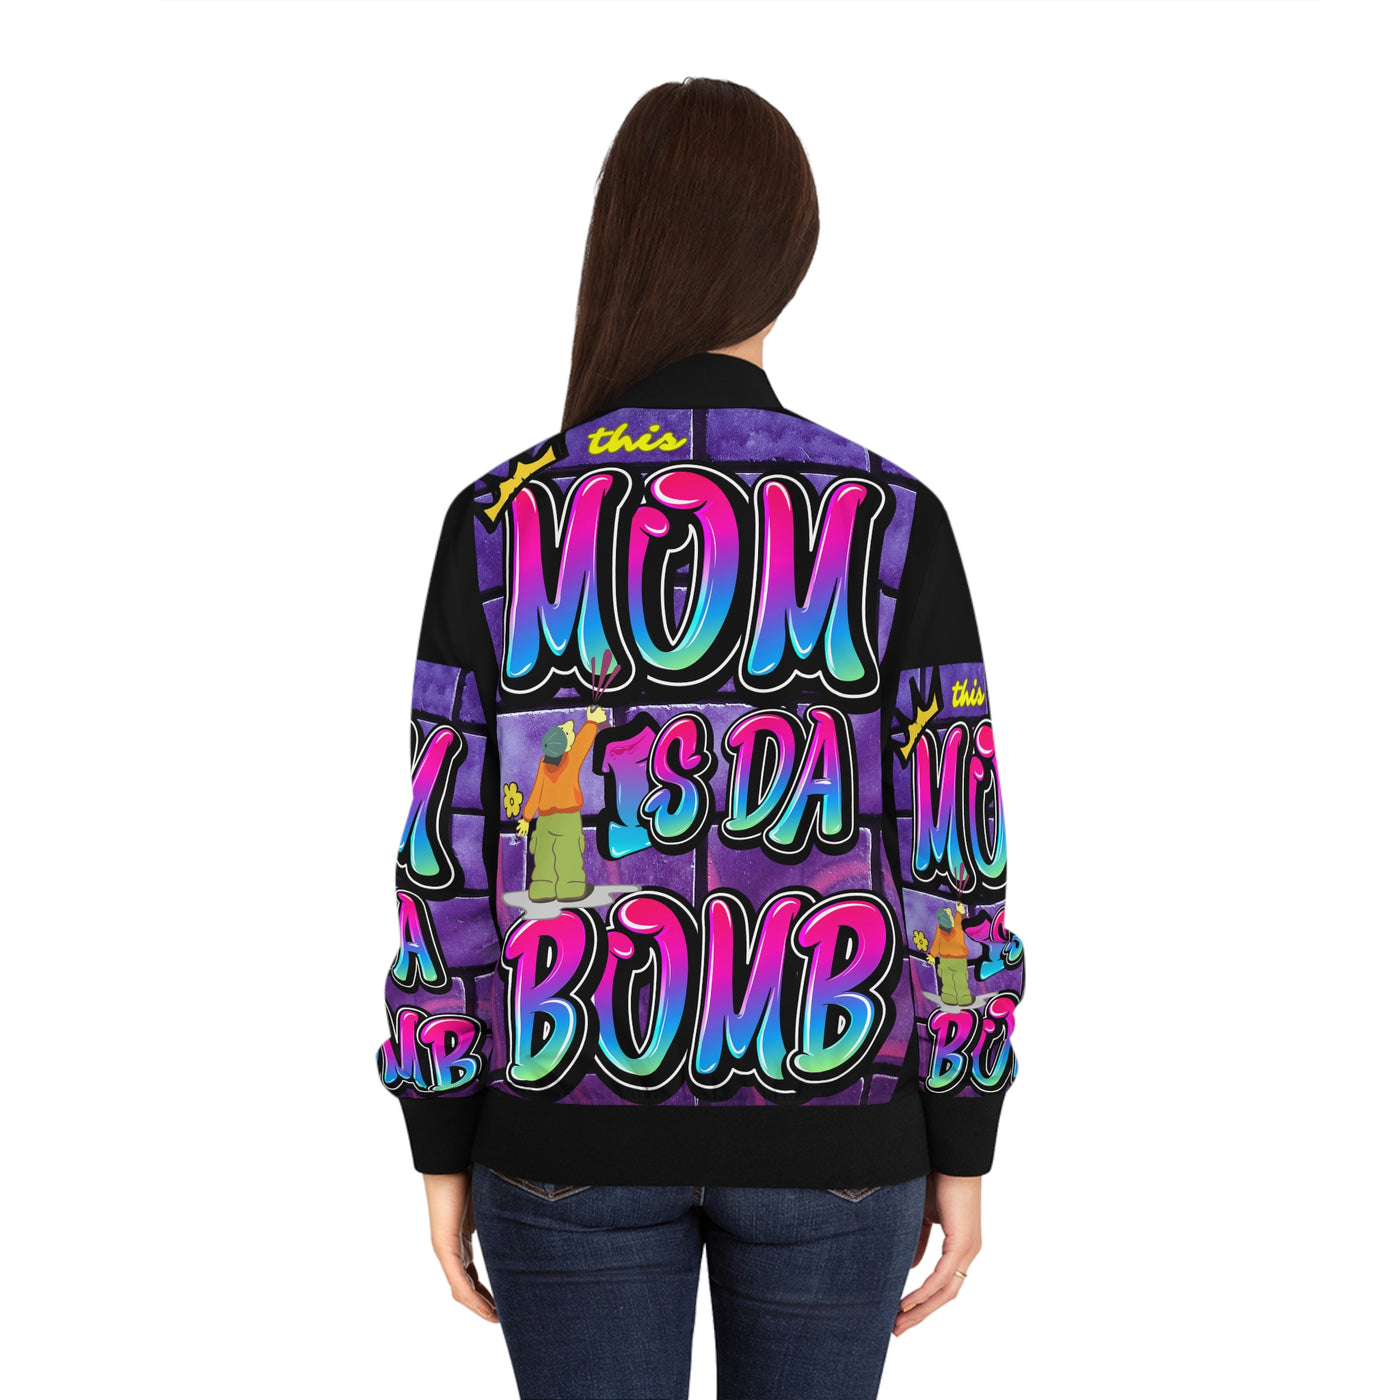 THIS MOM IS Women\'s THE 90s Rich Black – Bomber - - Jacket Retro BOMB Vibes (AOP)